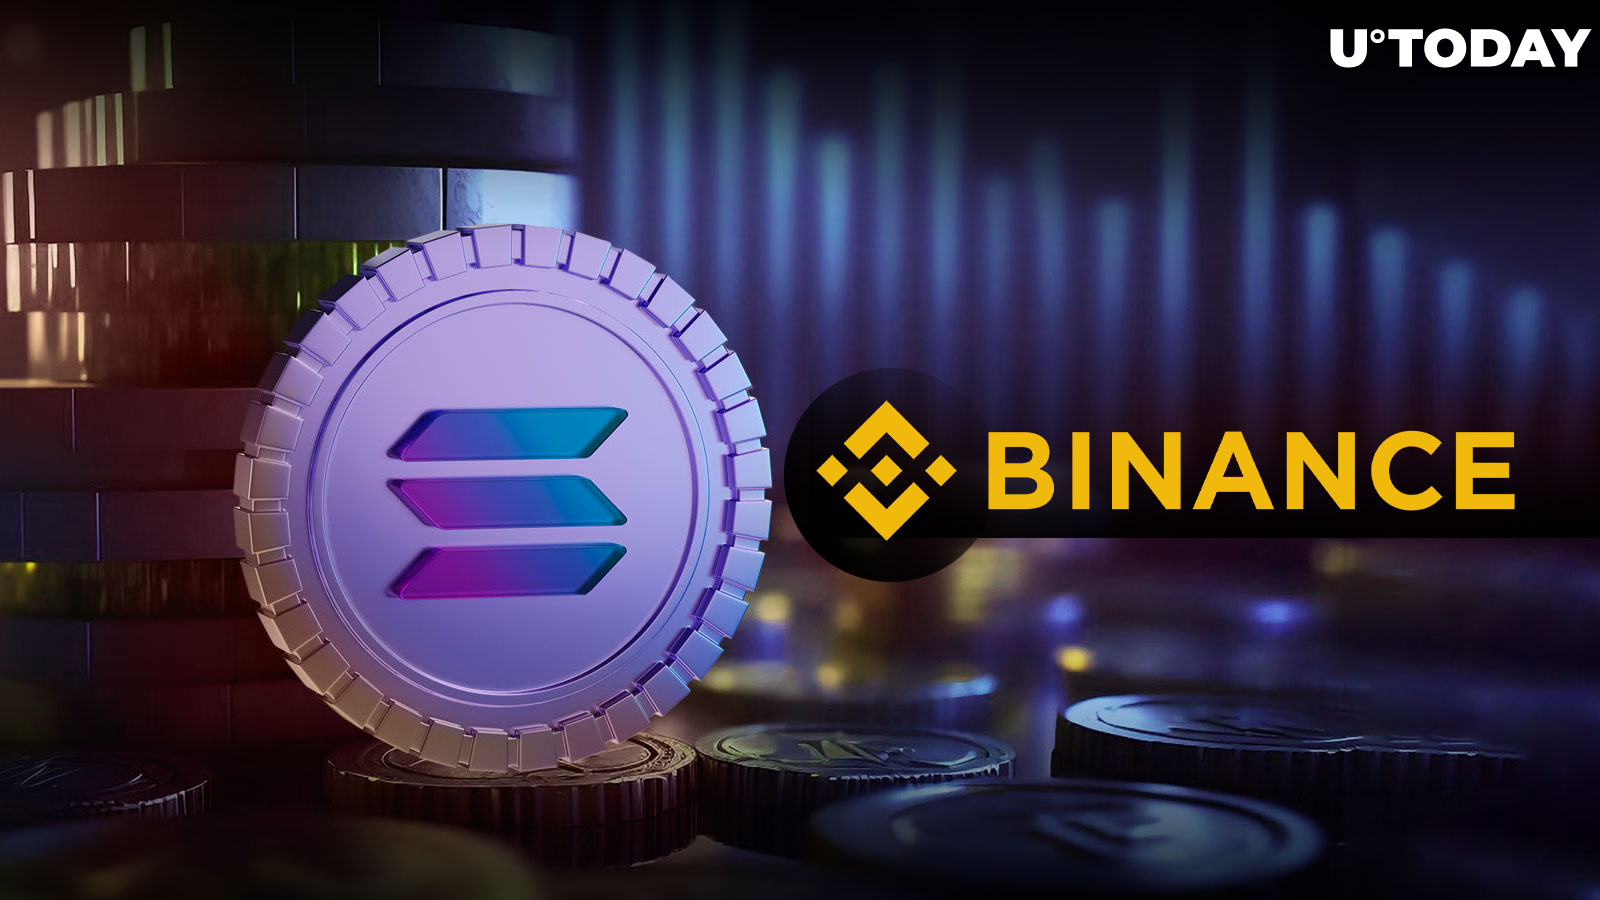 Solana (SOL) Rally Nearing Its End? Wallet Moves $23 Million to Binance Amid Price Dip